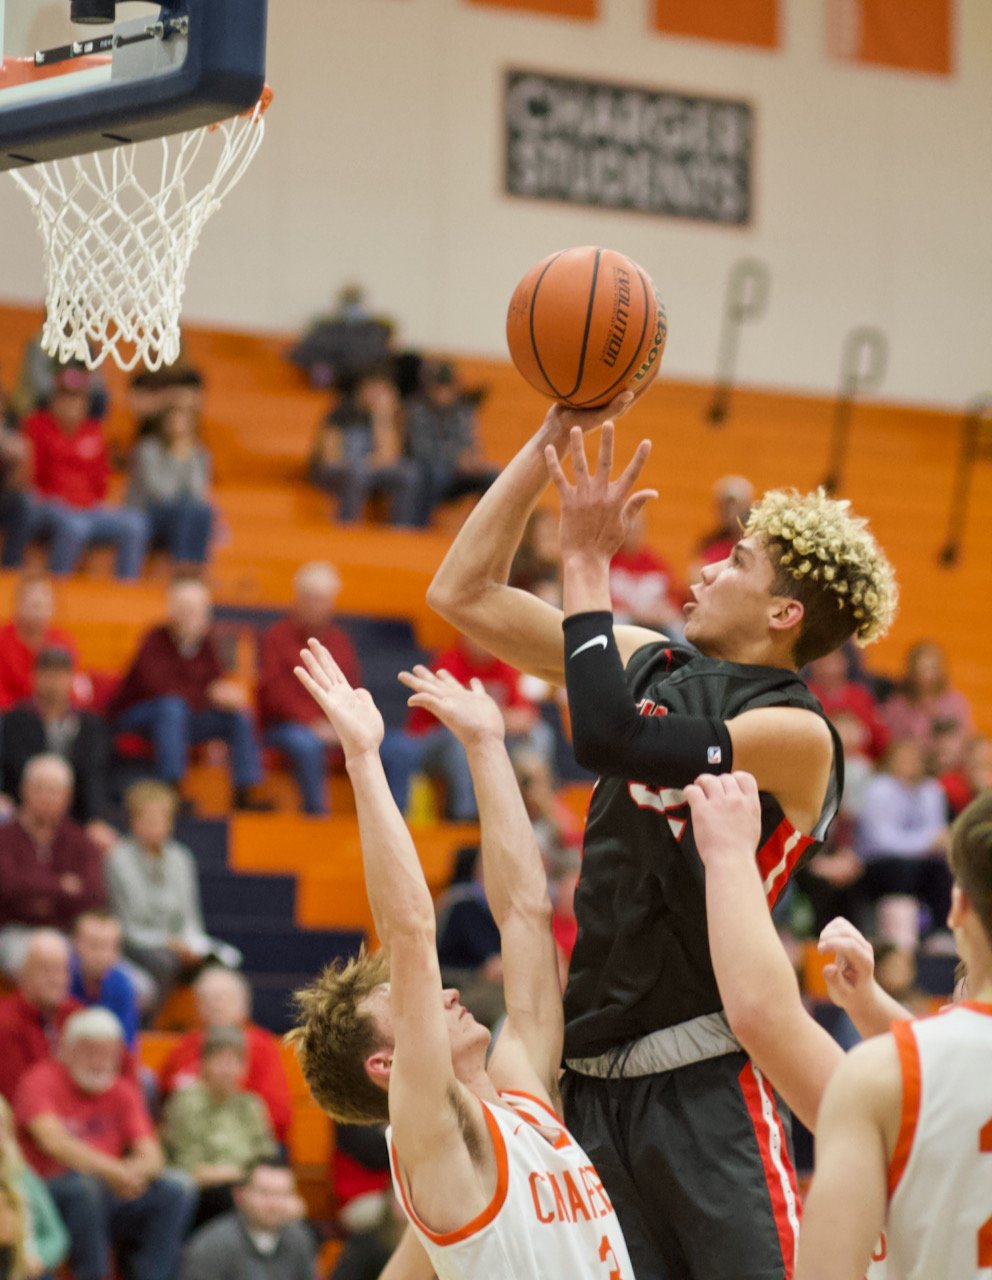 Avery Saunders recorded his 3rd straight 20+ point performance Friday to lead Southmont to a 59-37 county and conference win over North Montgomery.